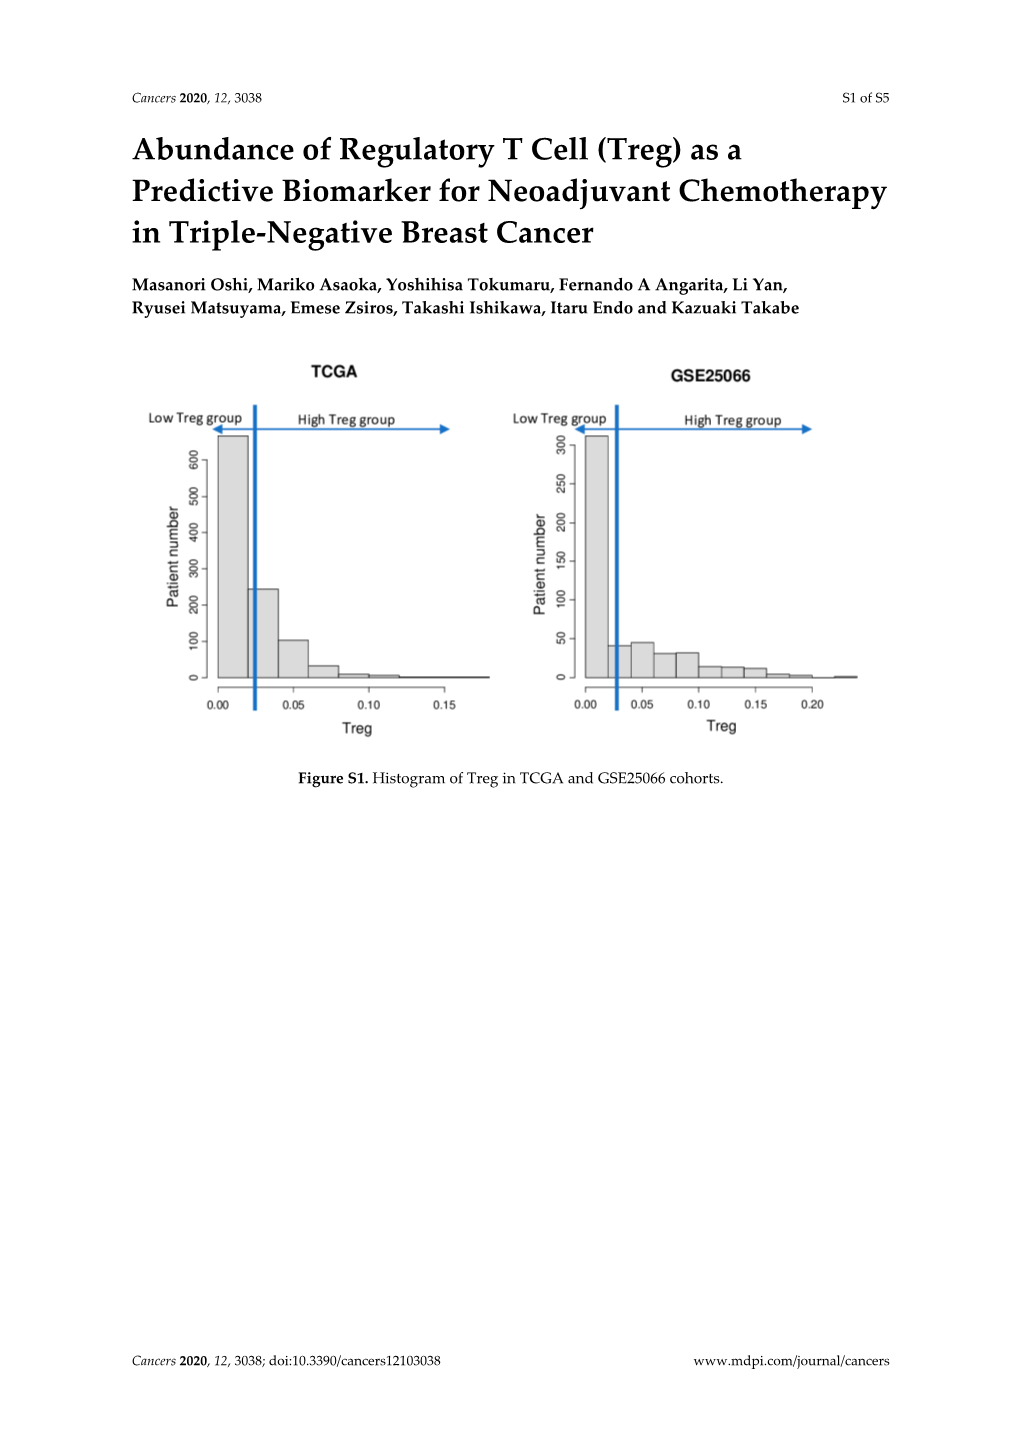 Abundance of Regulatory T Cell (Treg) As a Predictive Biomarker for Neoadjuvant Chemotherapy in Triple-Negative Breast Cancer